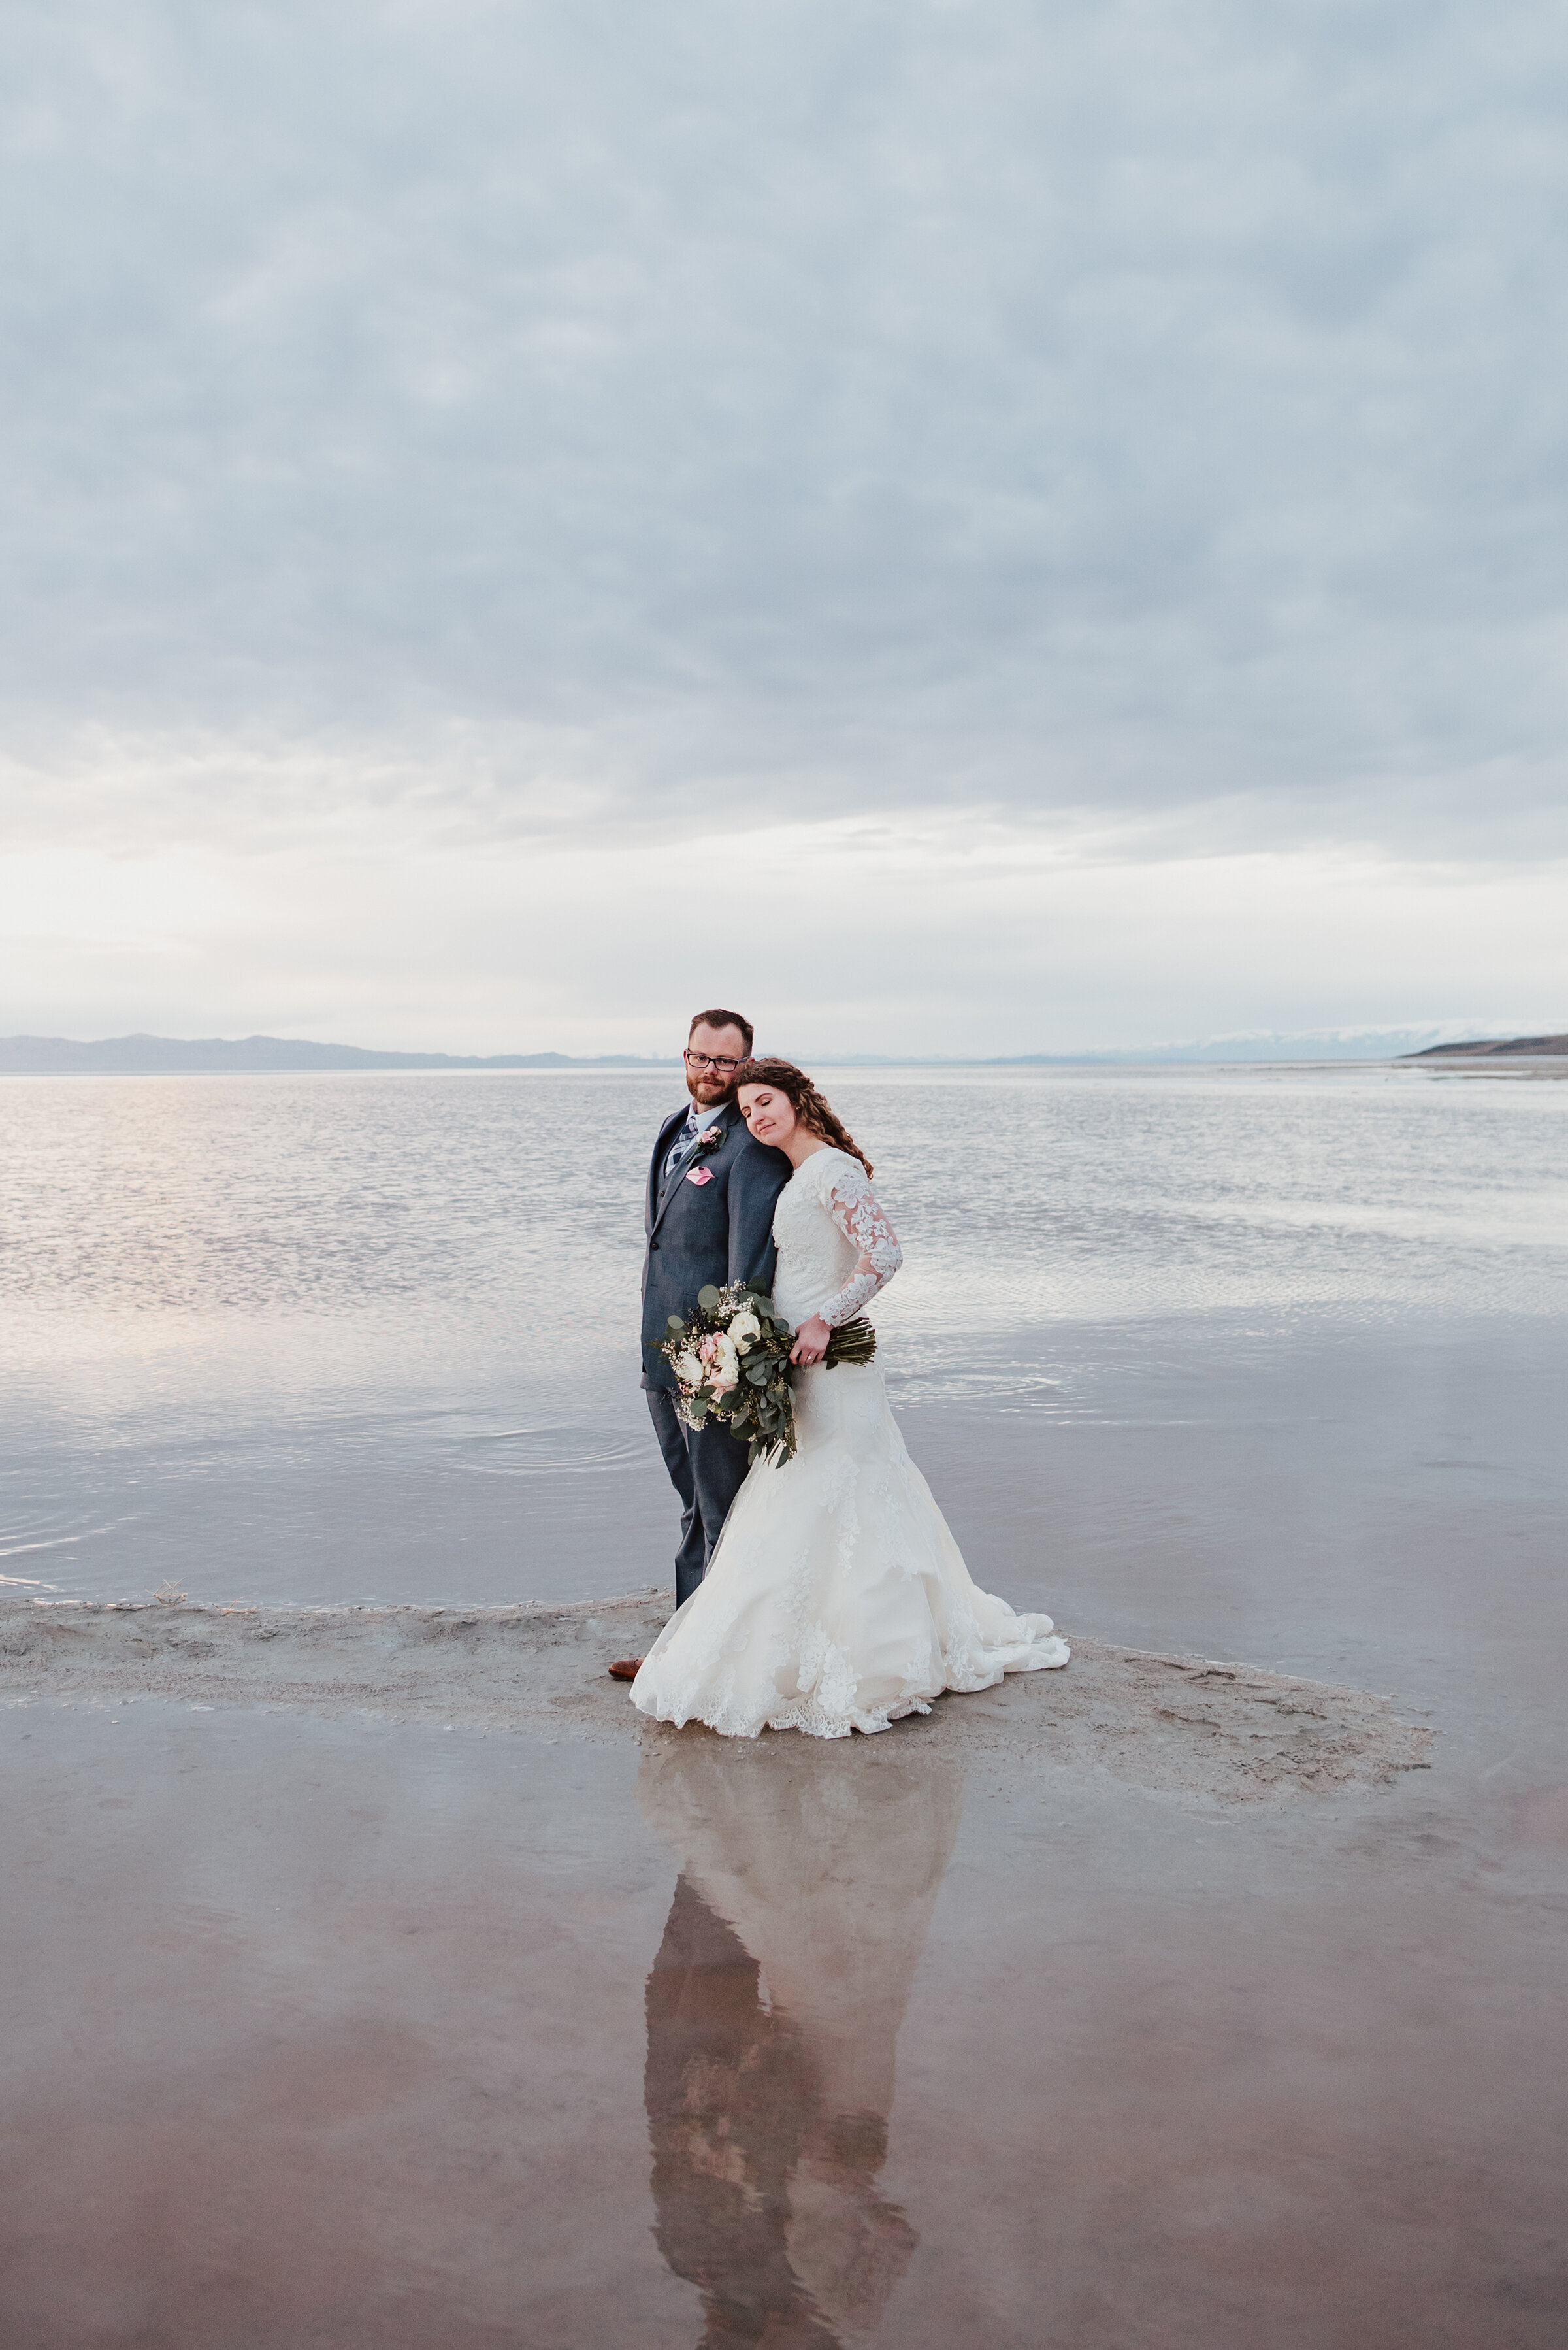  Enjoying the simple moments during their wedding formal photography session by walking down the sand as the sunset reflected off the water just beyond them. Wedding formal photoshoot in Spiral Jetty Northern Utah Great Salt Lake photography wedding formals natural photo aesthetic bride and groom #spiraljetty #utahphotography #weddingformals #gettingmarried #weddingattire #utahwedding #greatoutdoorswedding #weddingformalsphotoshoot #naturalbeauty 